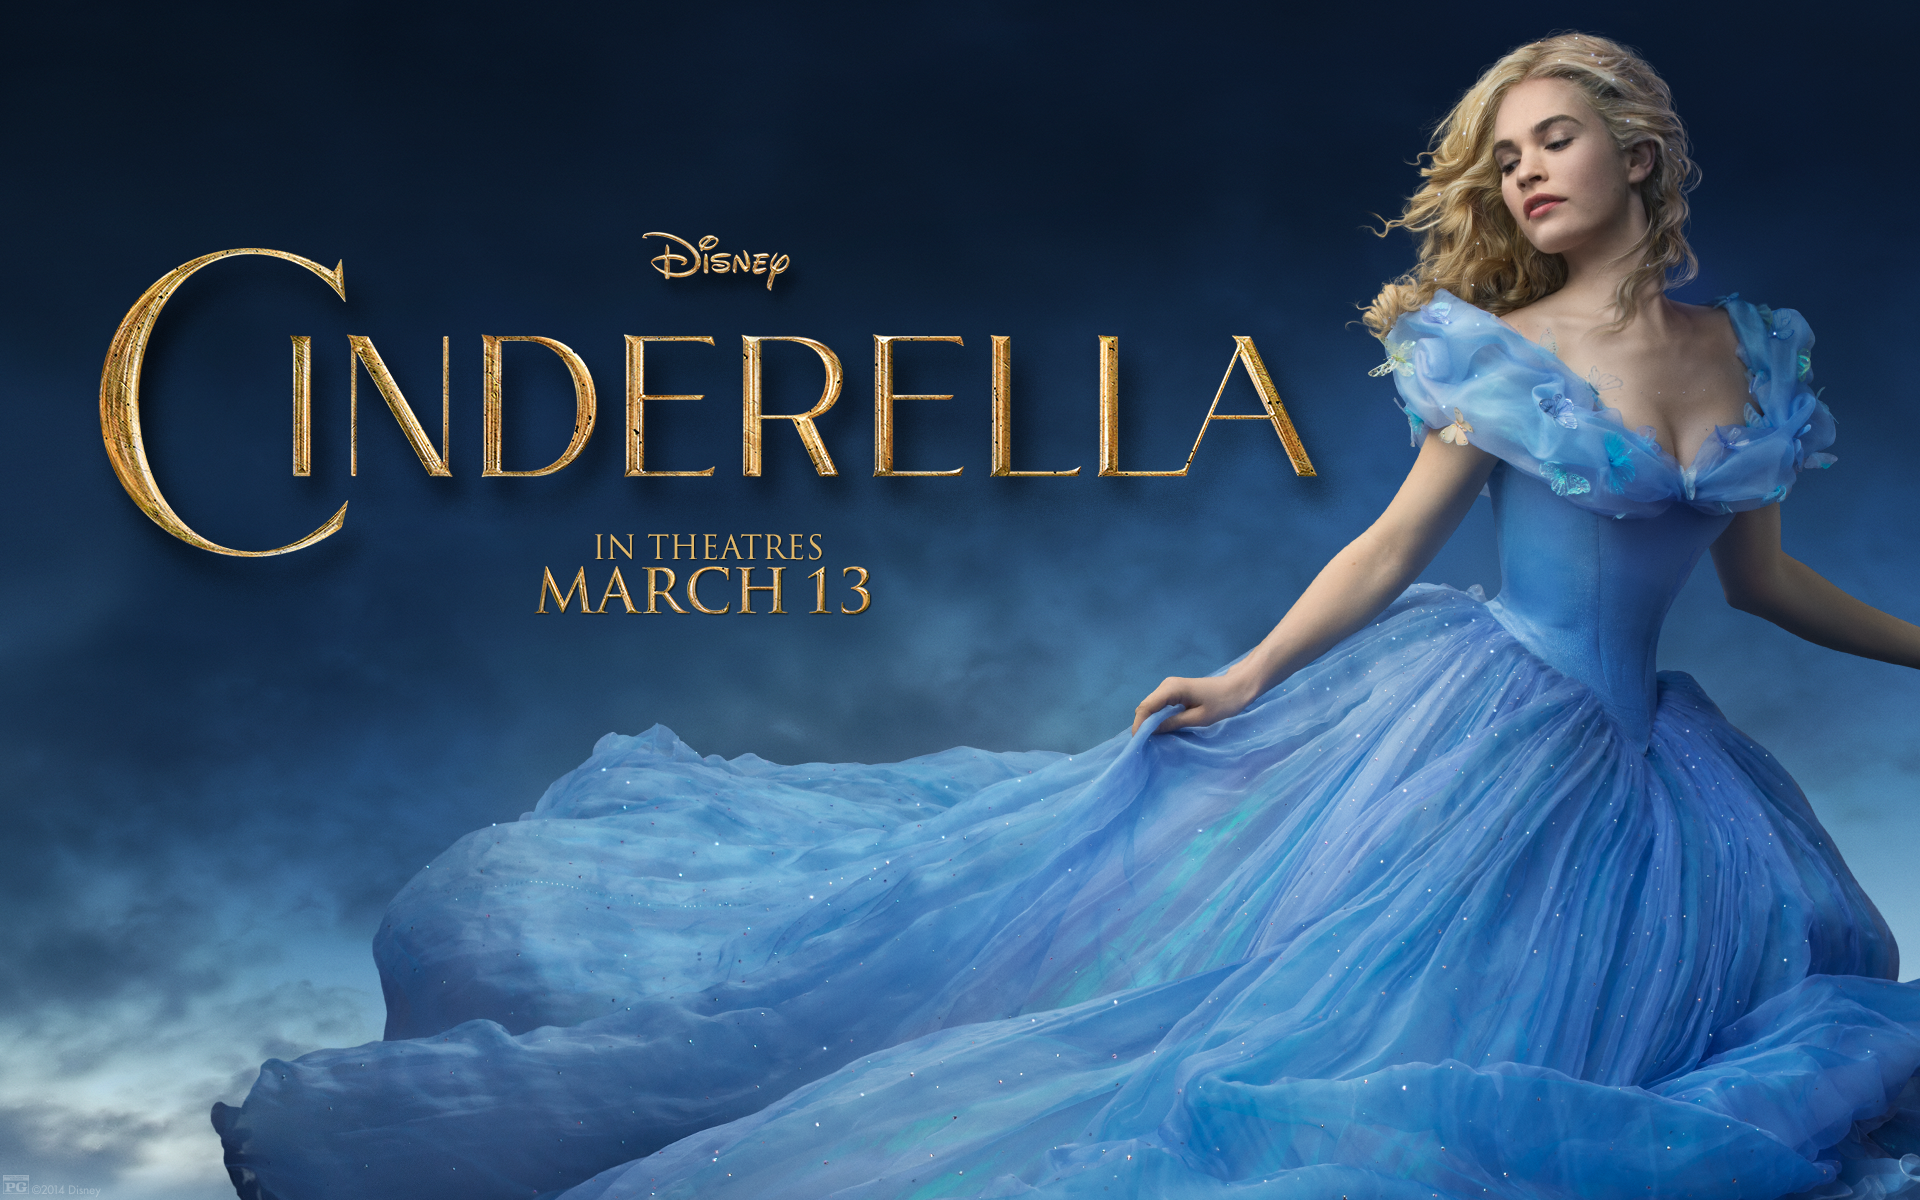 A Review of Disney's Cinderella (Yes, 2015 One)